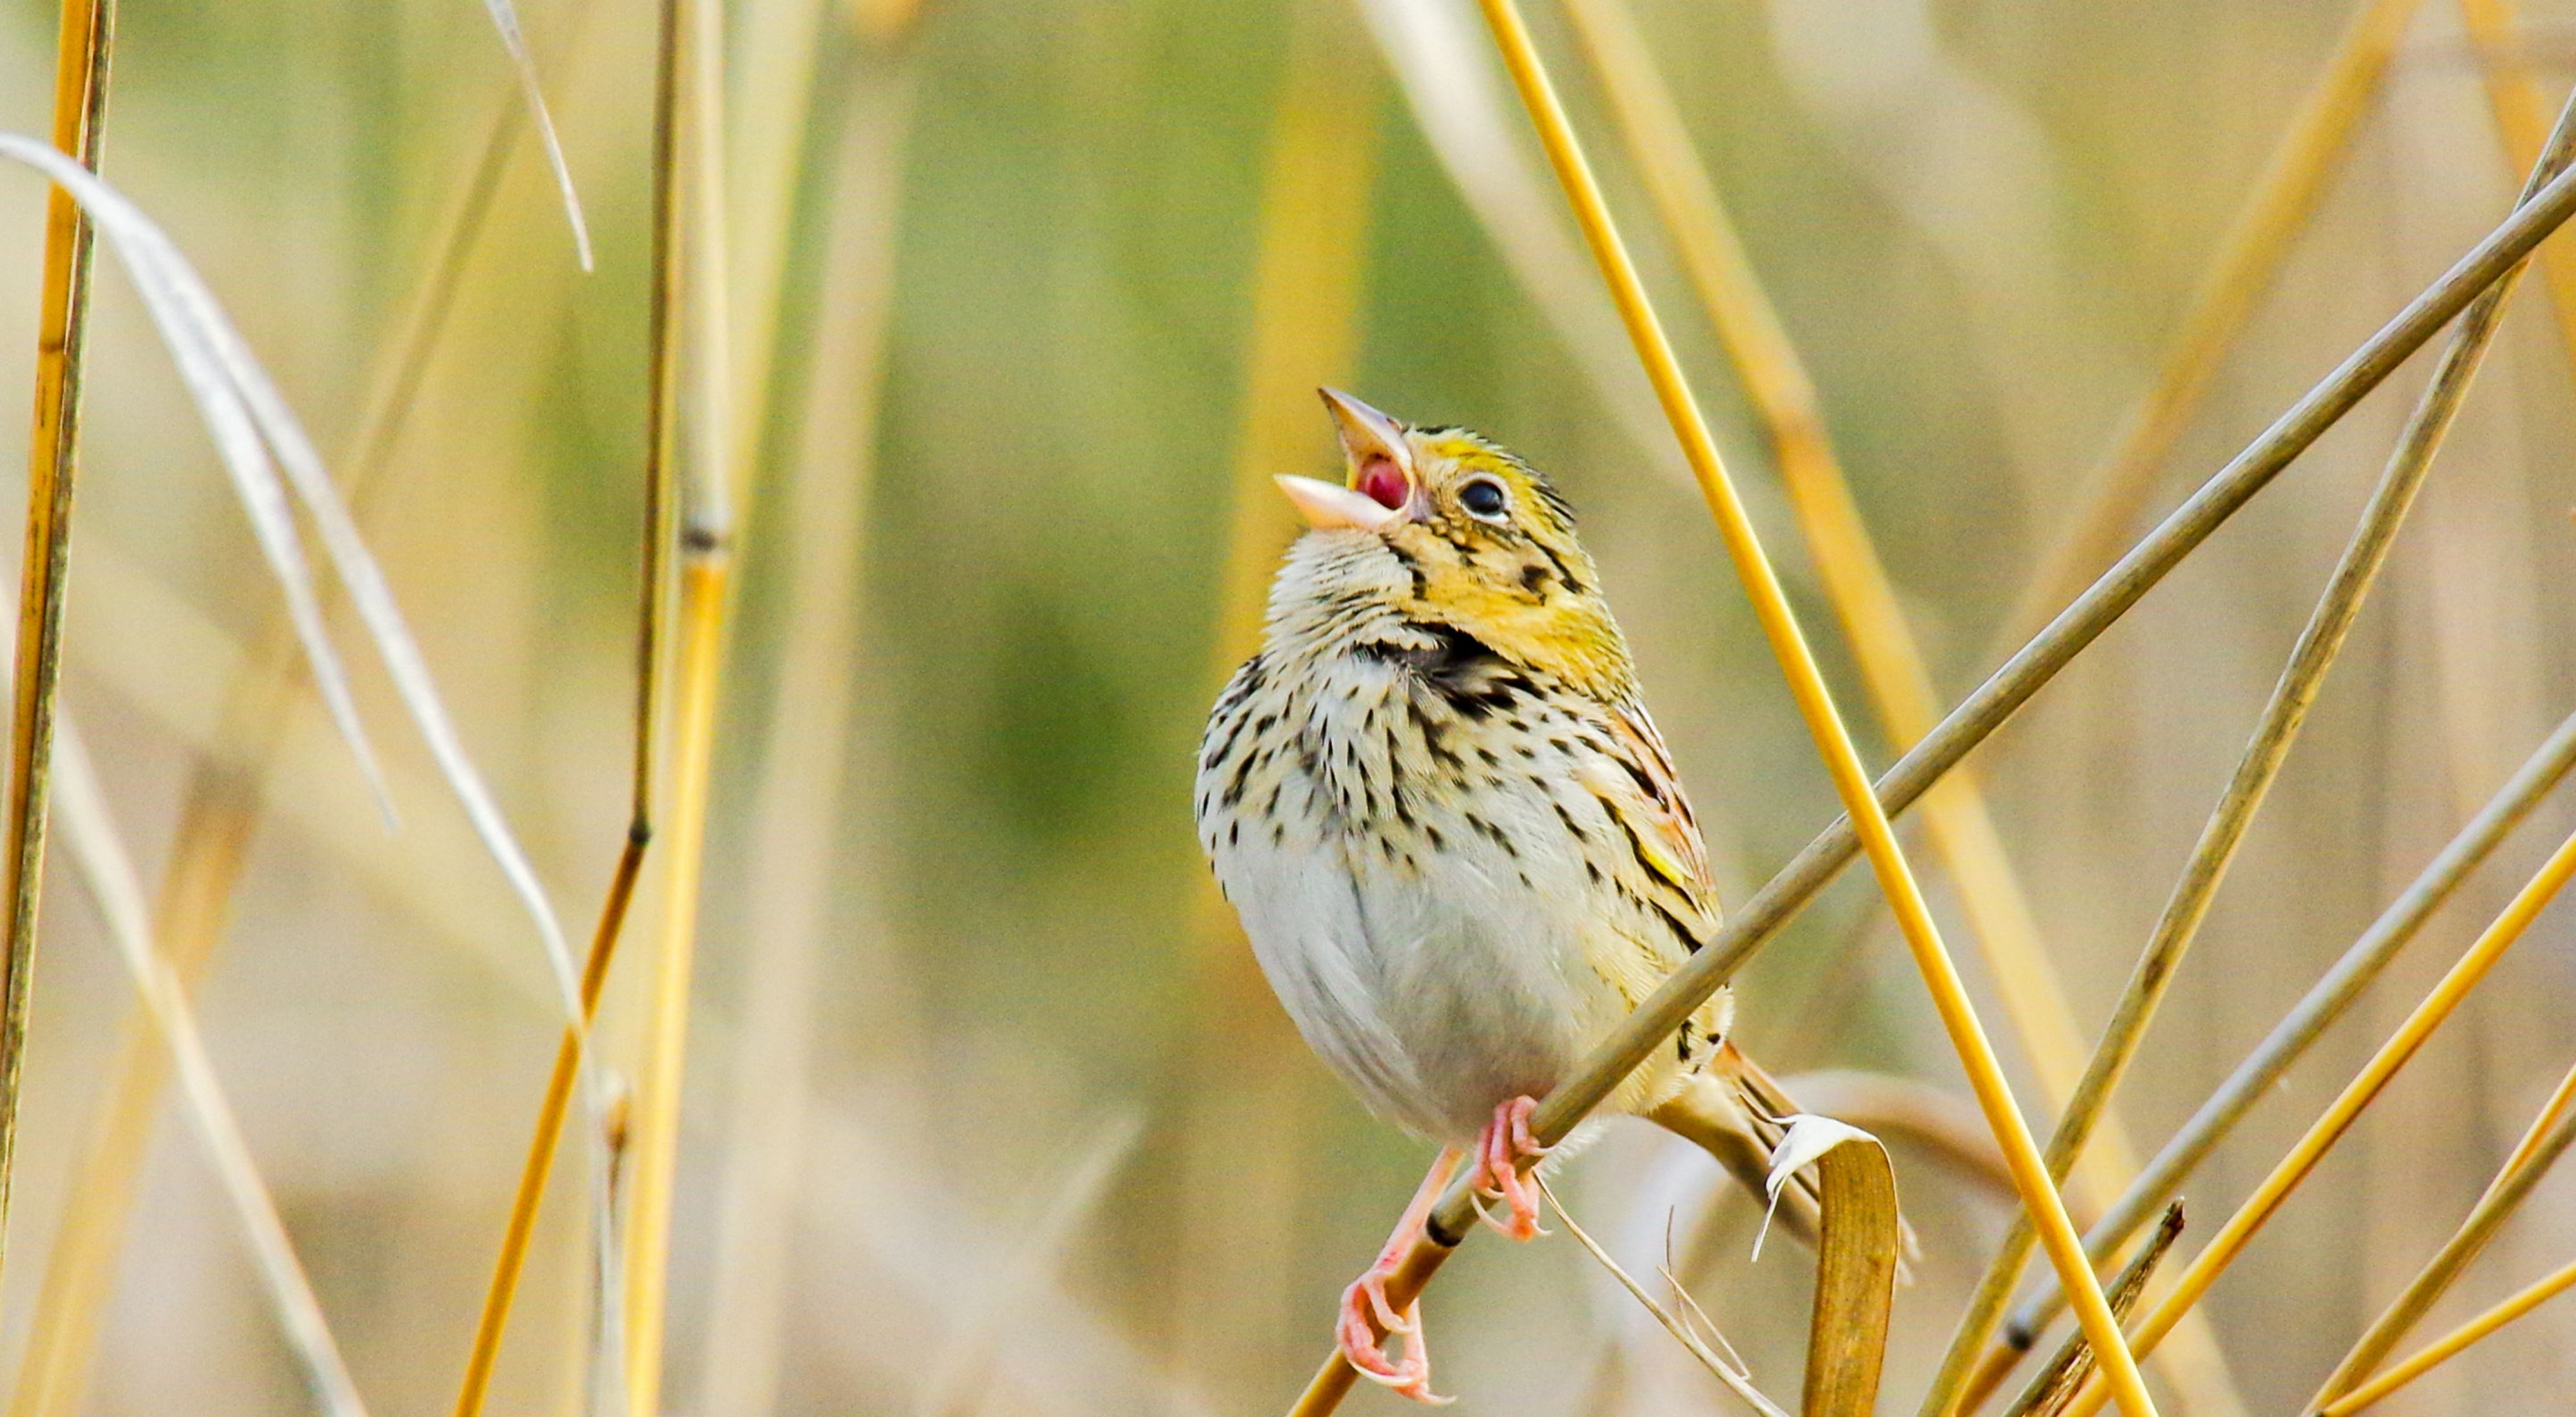 The Henslow's sparrow is one of the rare grassland species found at the Persimmon Gully Preserve.